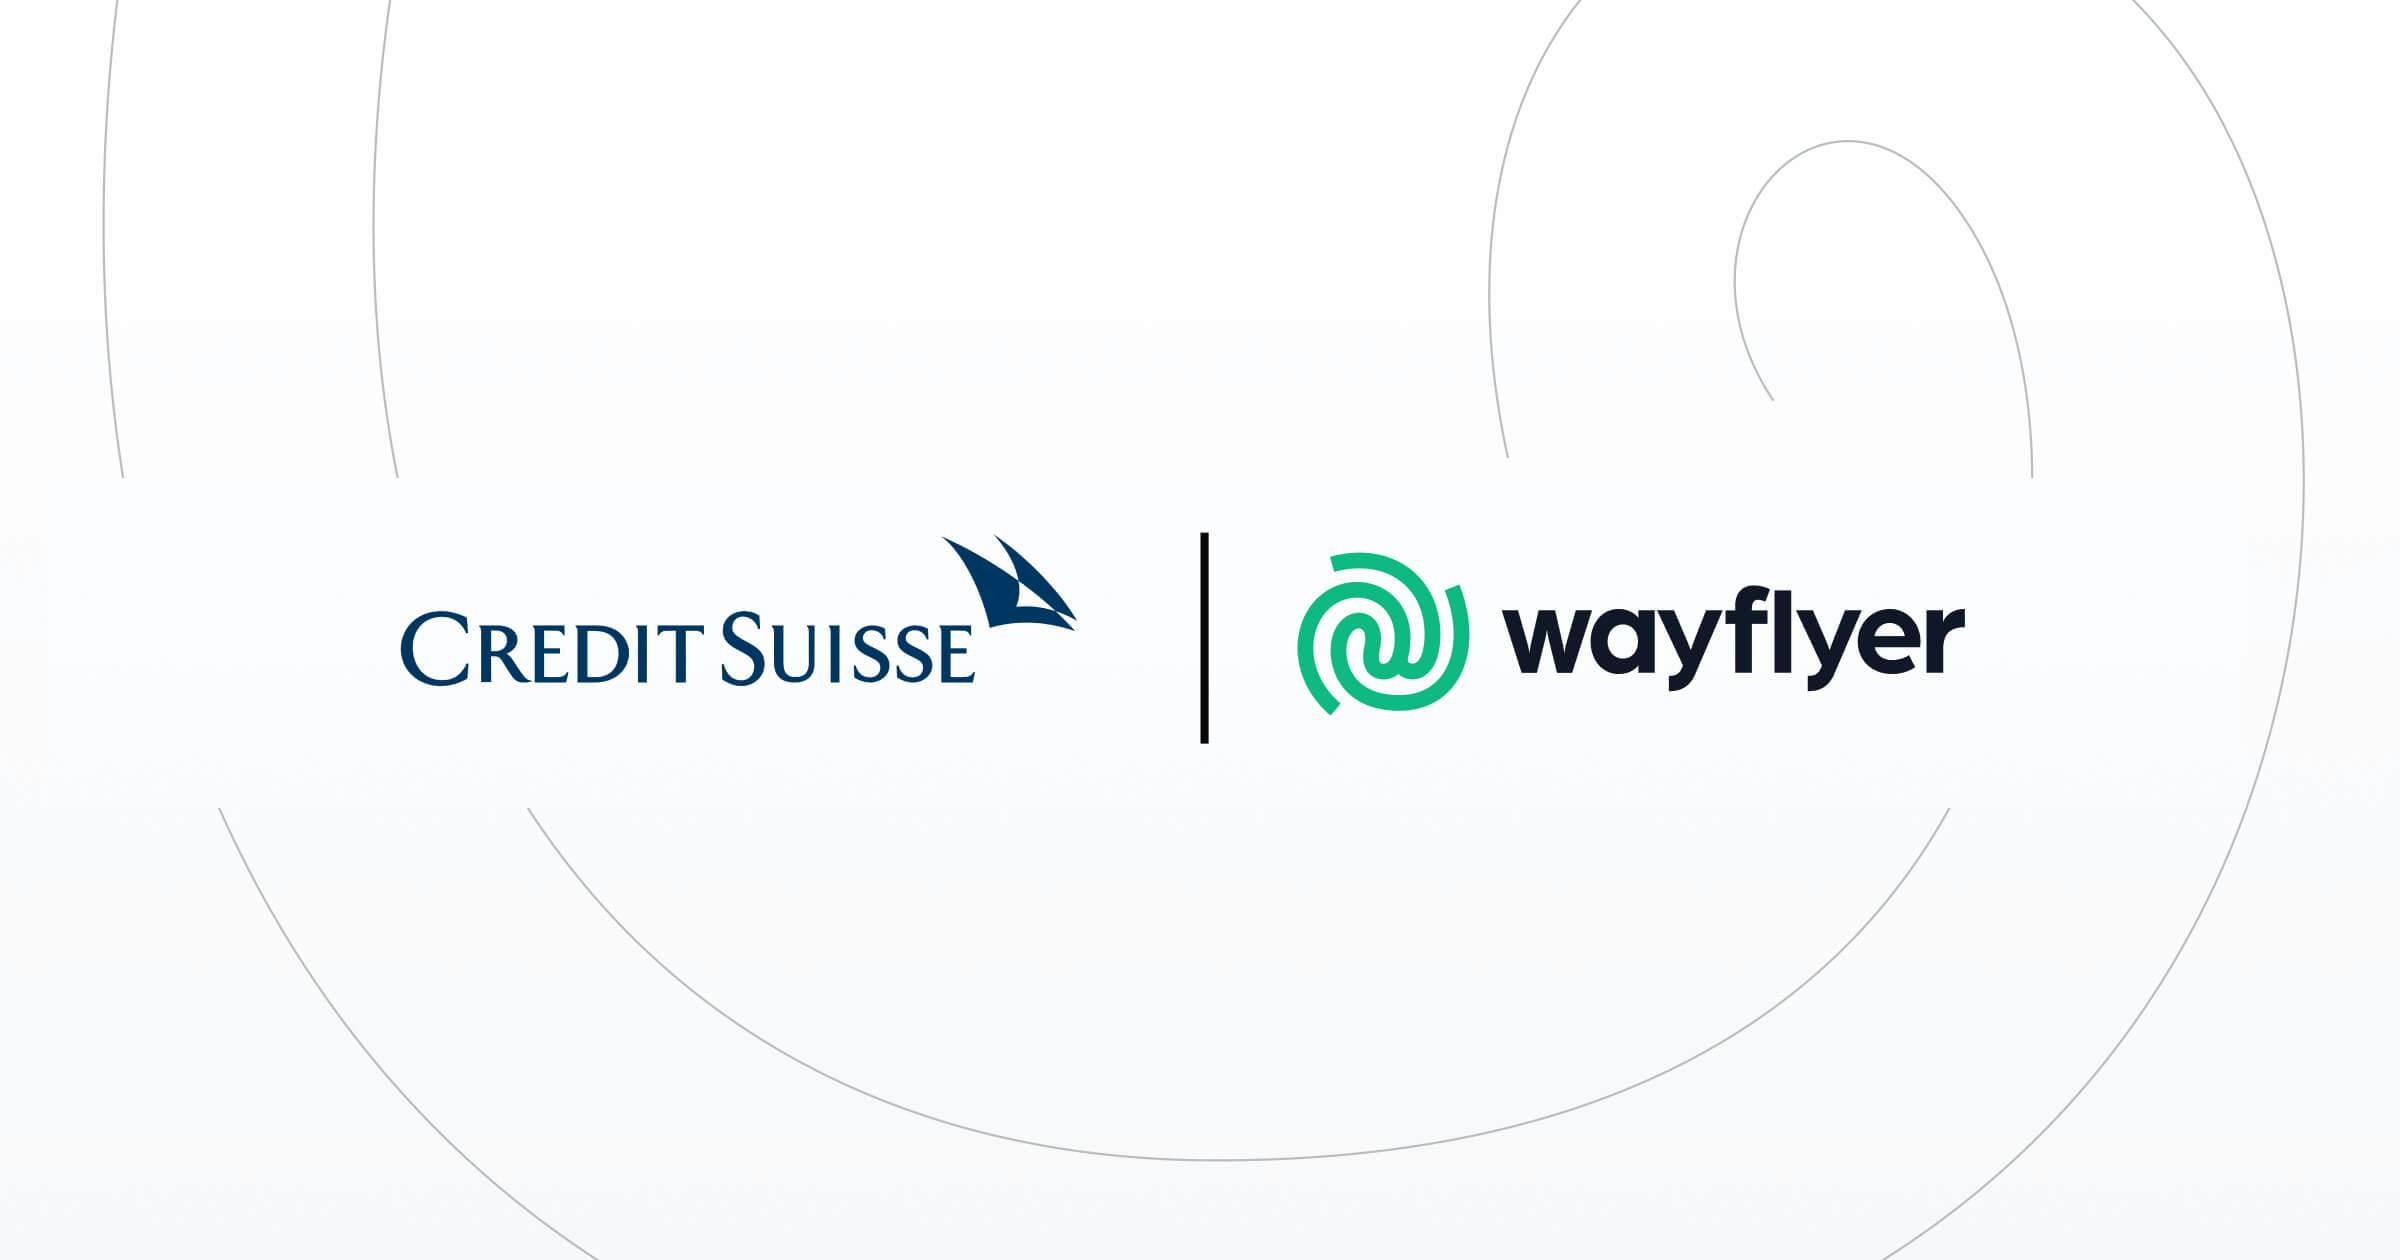 Credit Suisse and Wayflyer logos separated by a bar